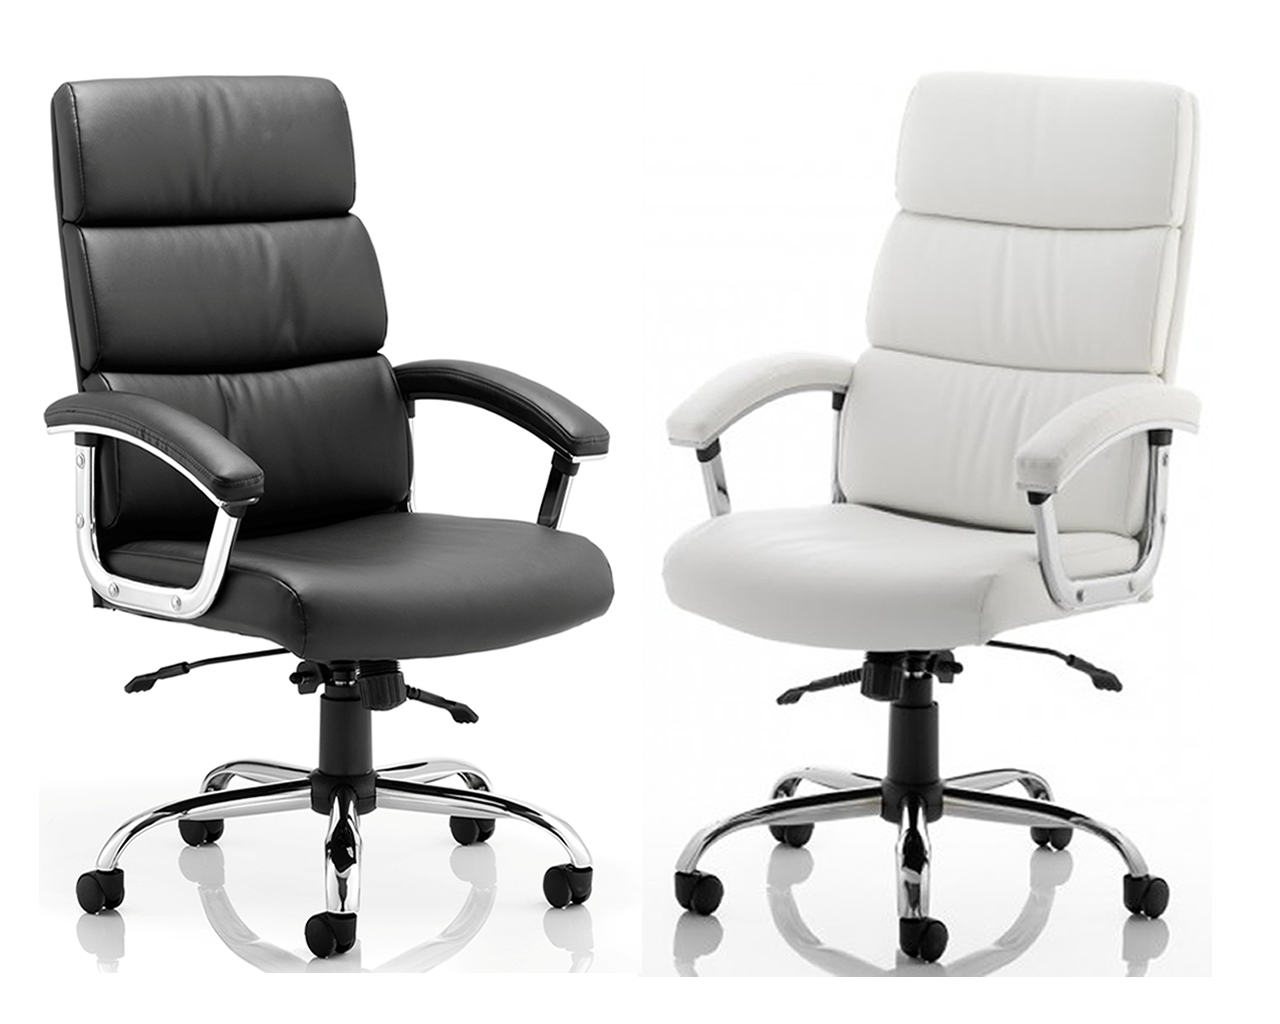 Desire High Back Leather Office Chair - Black or White Option North Yorkshire